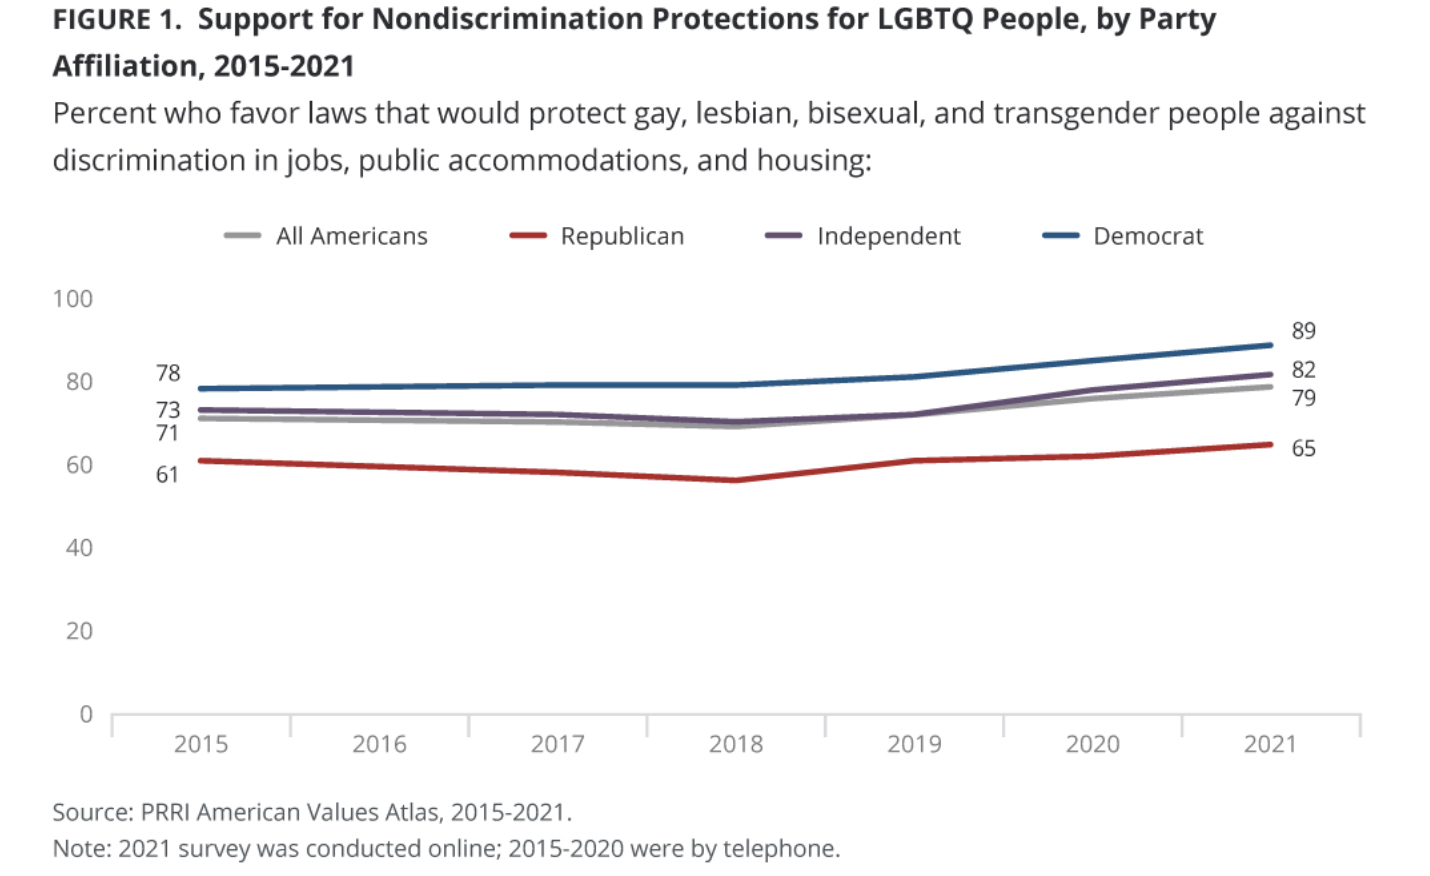 A line chart titled "Figure 1. Support for Nondiscrimination Protections for LGBTQ People, by Party Affiliation, 2015-2021" by "Percent who favor laws that would protect gay, lesbian, bisexual, and transgender people against discrimination in jobs, public accommodations, and housing" shows rates by all Americans, Republican, independent and Democrat.